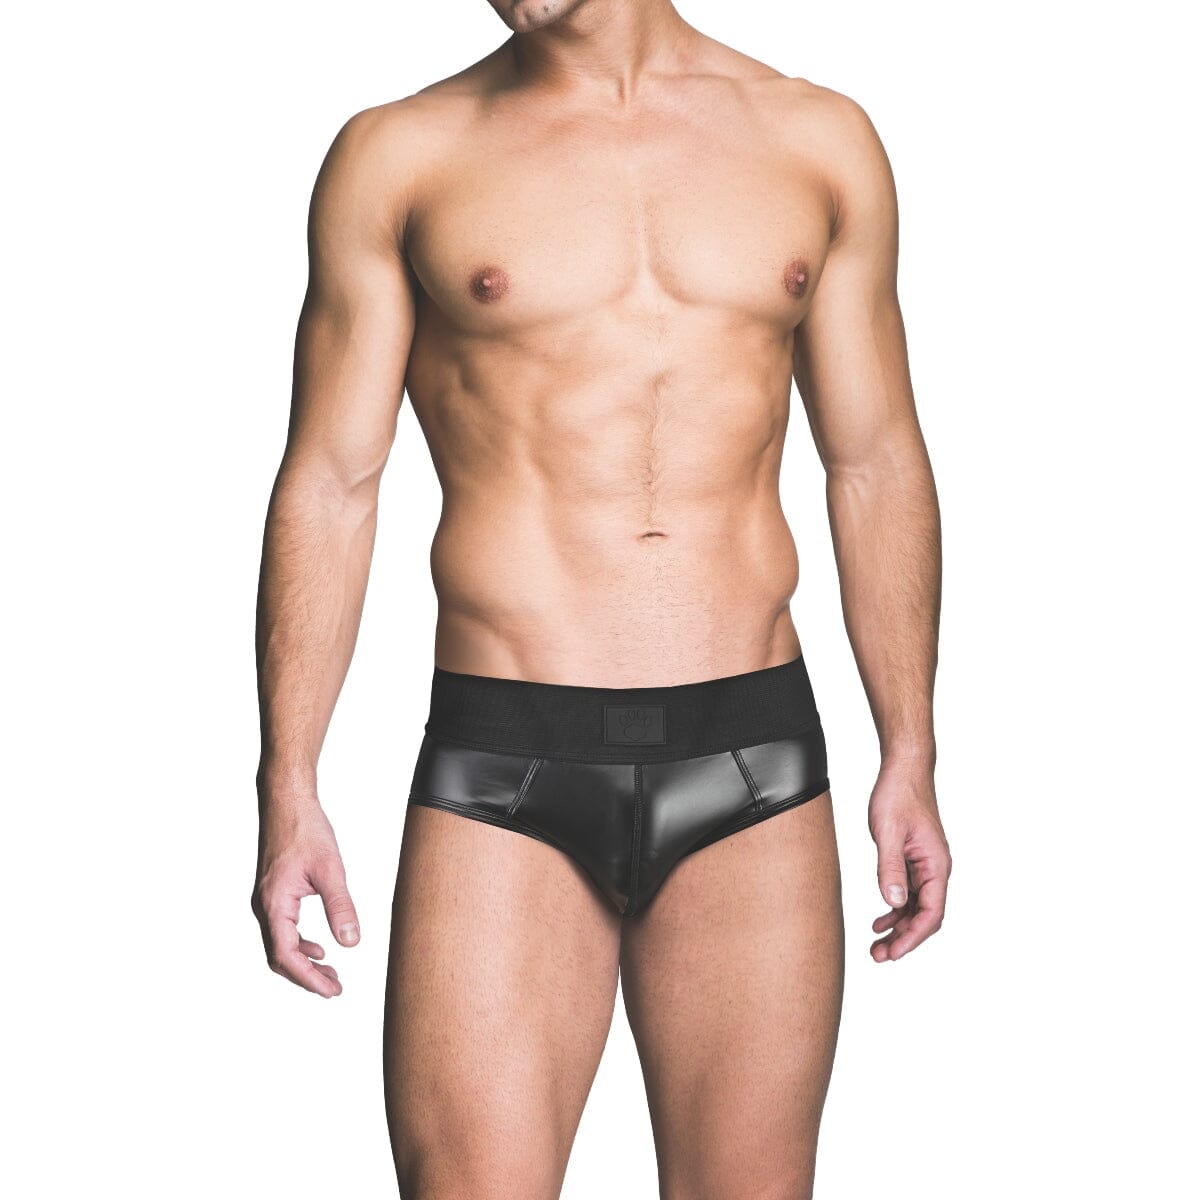 Wetlook Ass-less Brief with Backless Design for Men